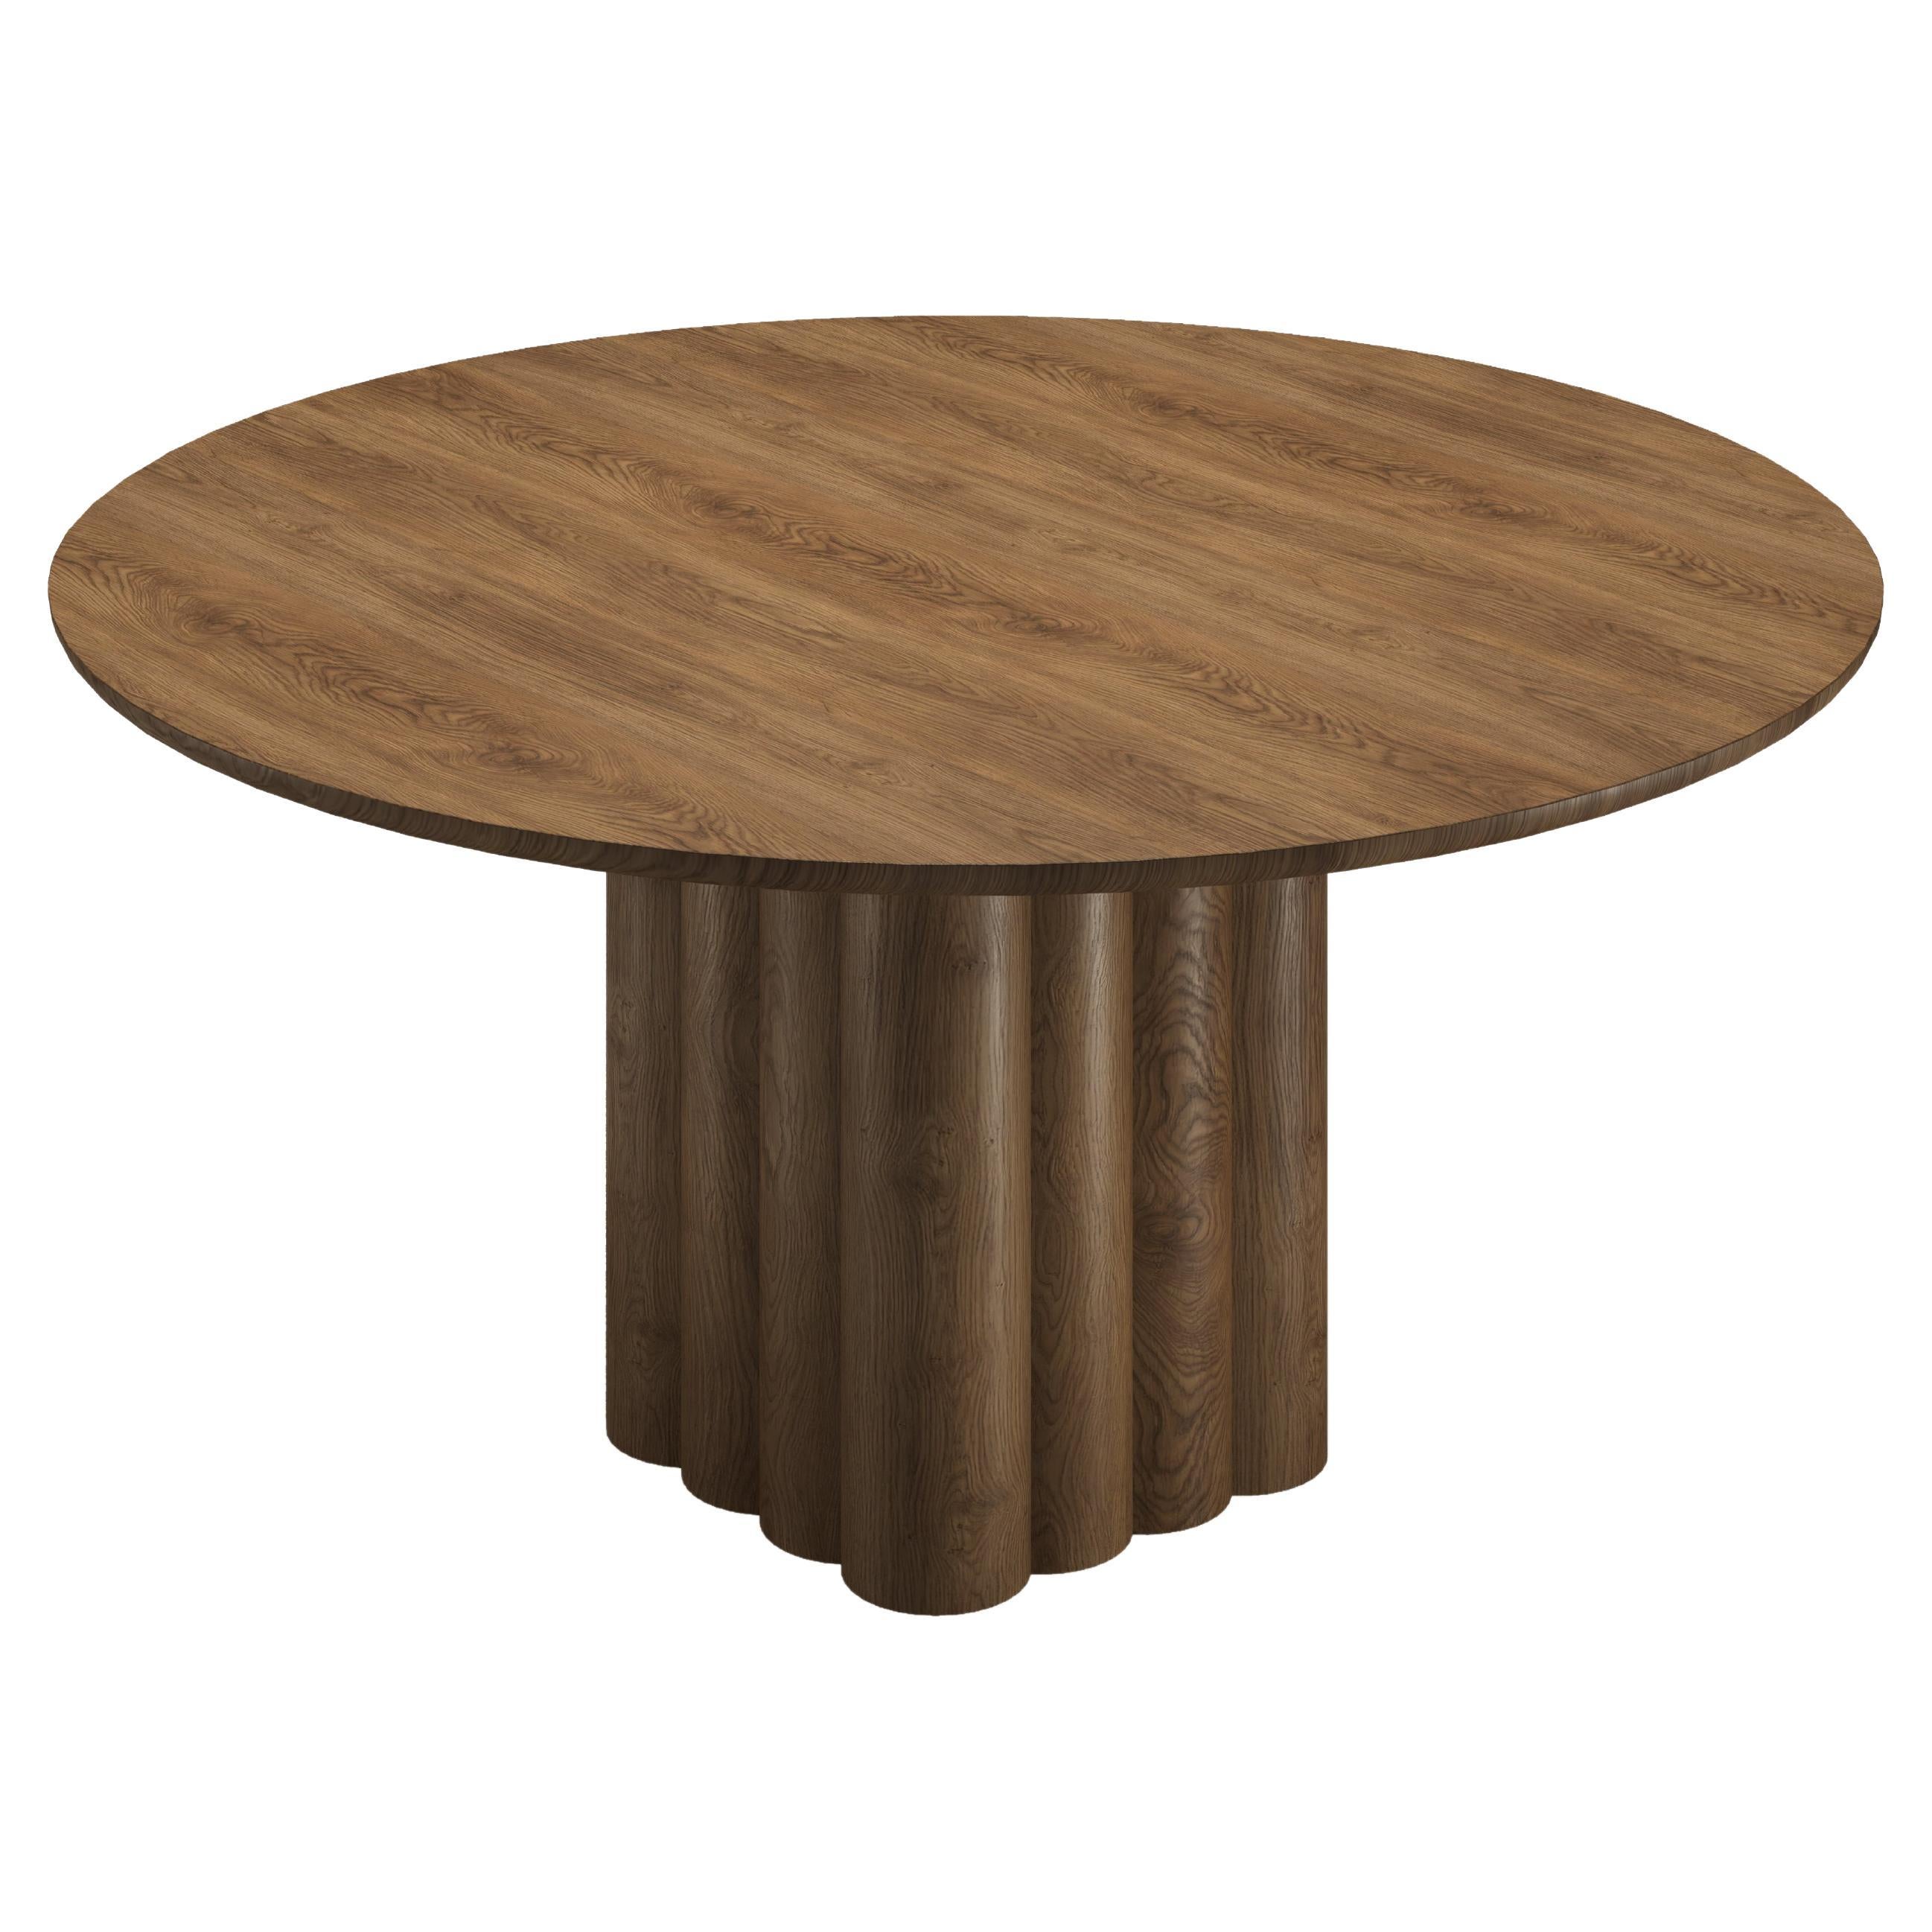 Round Dining Table 'Plush' by Dk3, Smoked Oak or Walnut, 160 cm